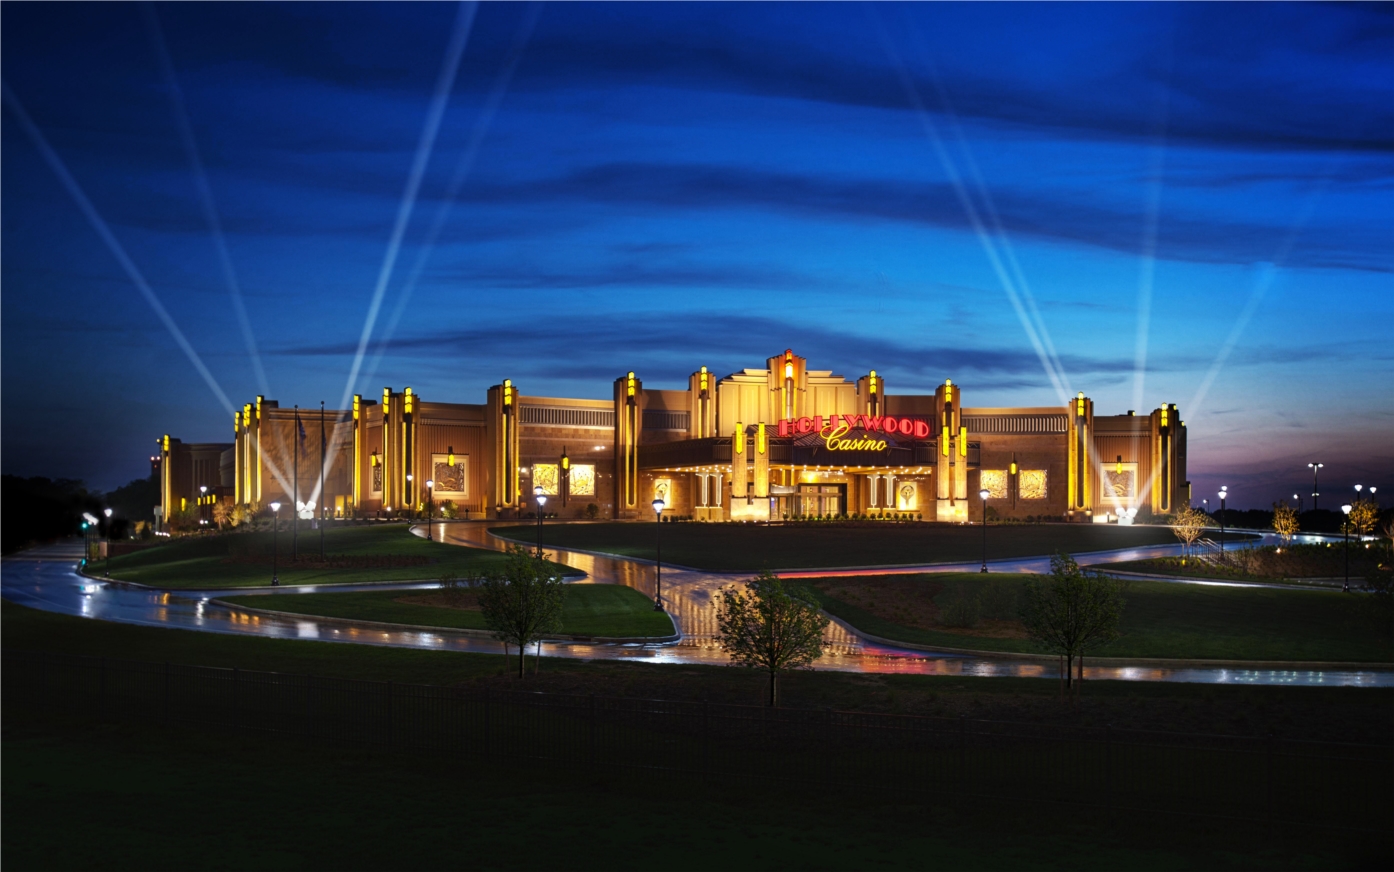 Nighttime view of the Hollywood Casino.